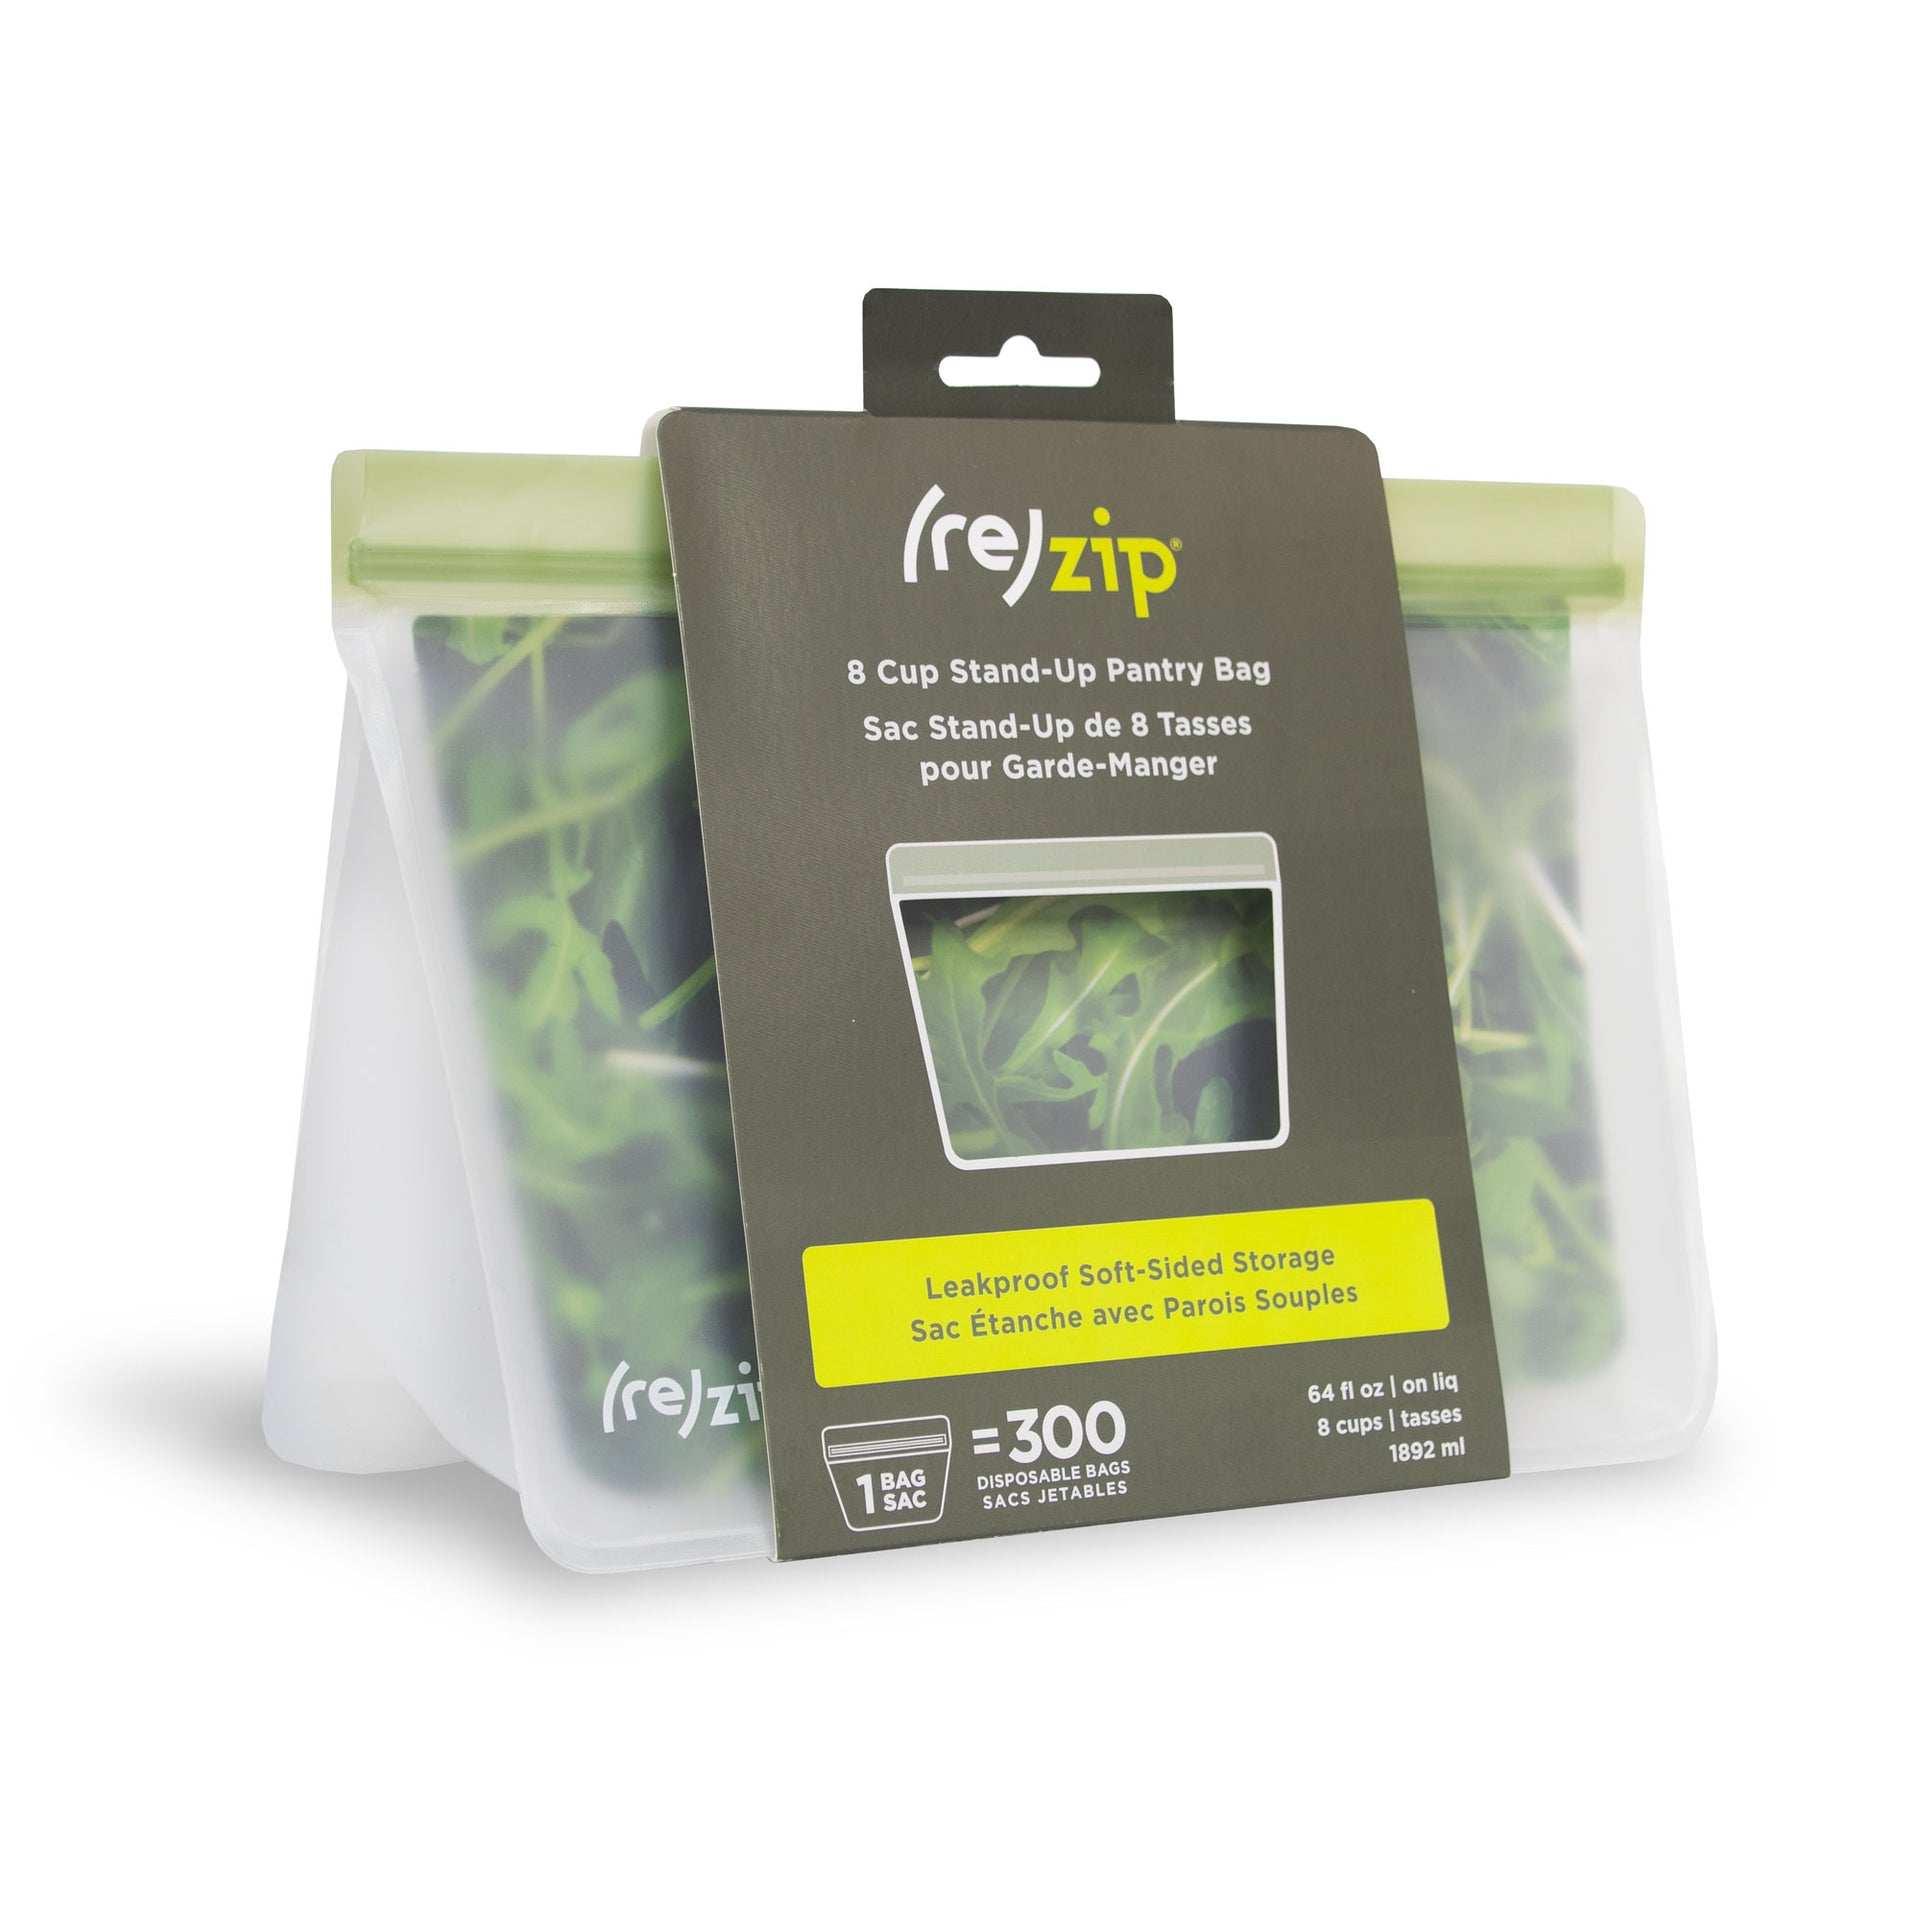 packaged 8 cup stand-up pantry bag in sage